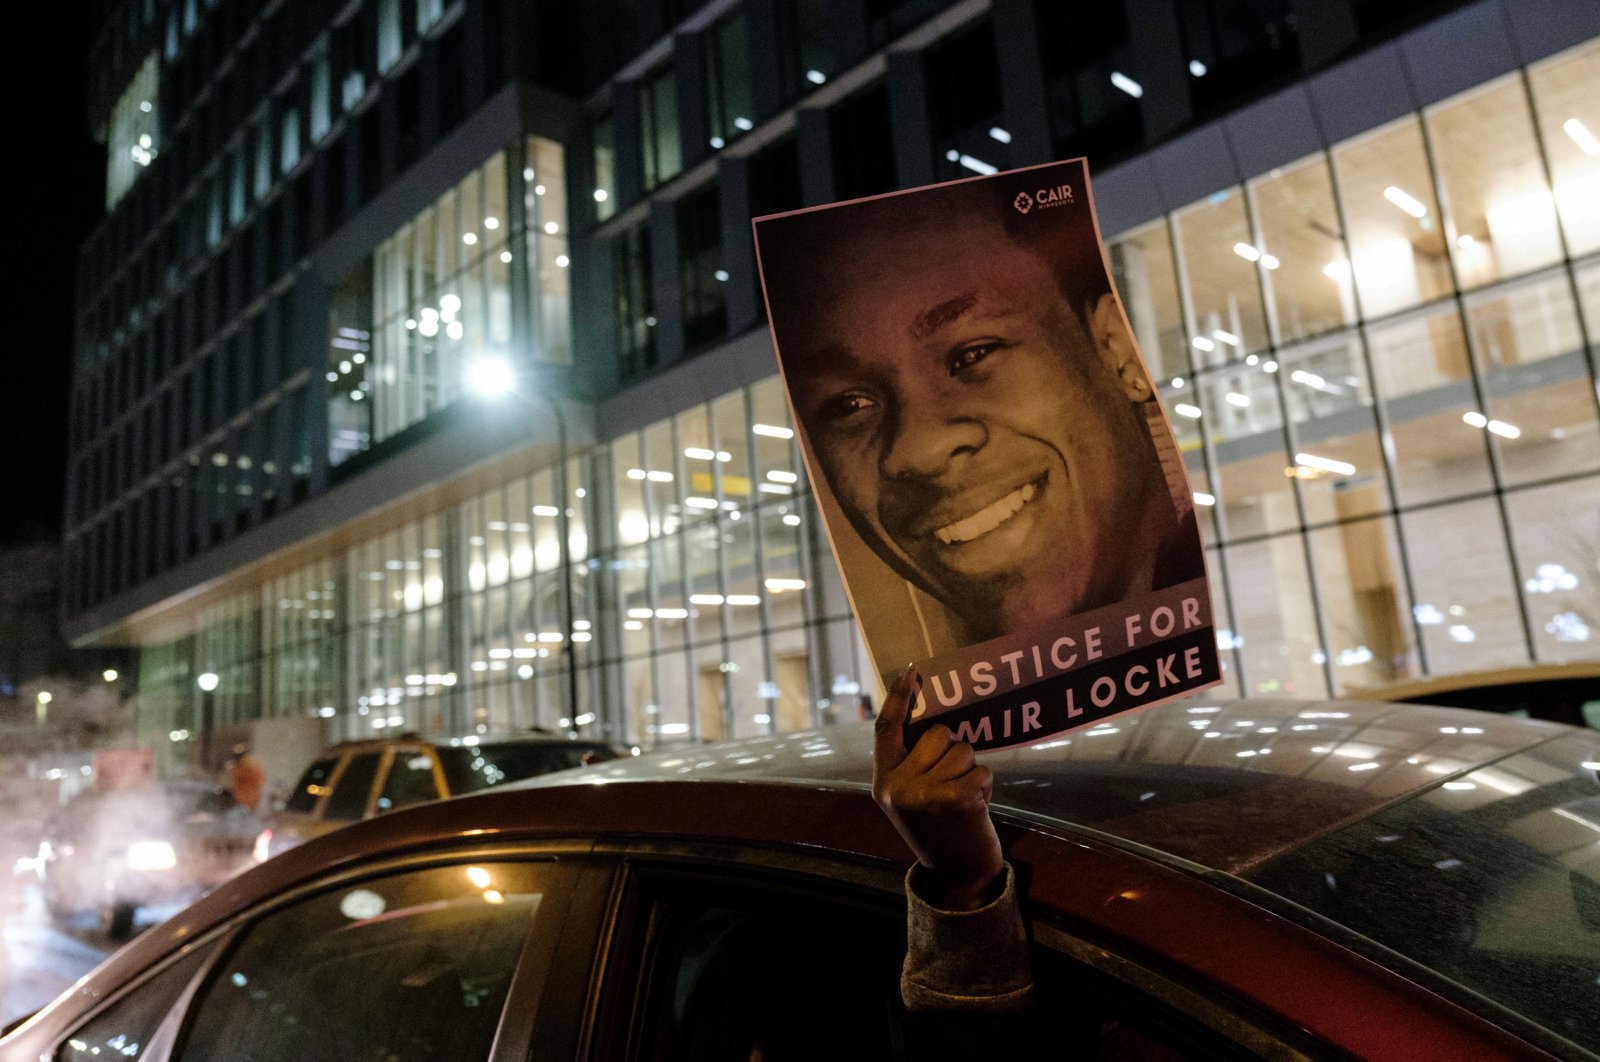 A demonstrator holds up a poster depicting Amir Locke, who was shot and killed by Minneapolis police’s SWAT team, at a protest in Minneapolis, Minnesota, U.S., Feb. 4, 2022. (Reuters Photo)